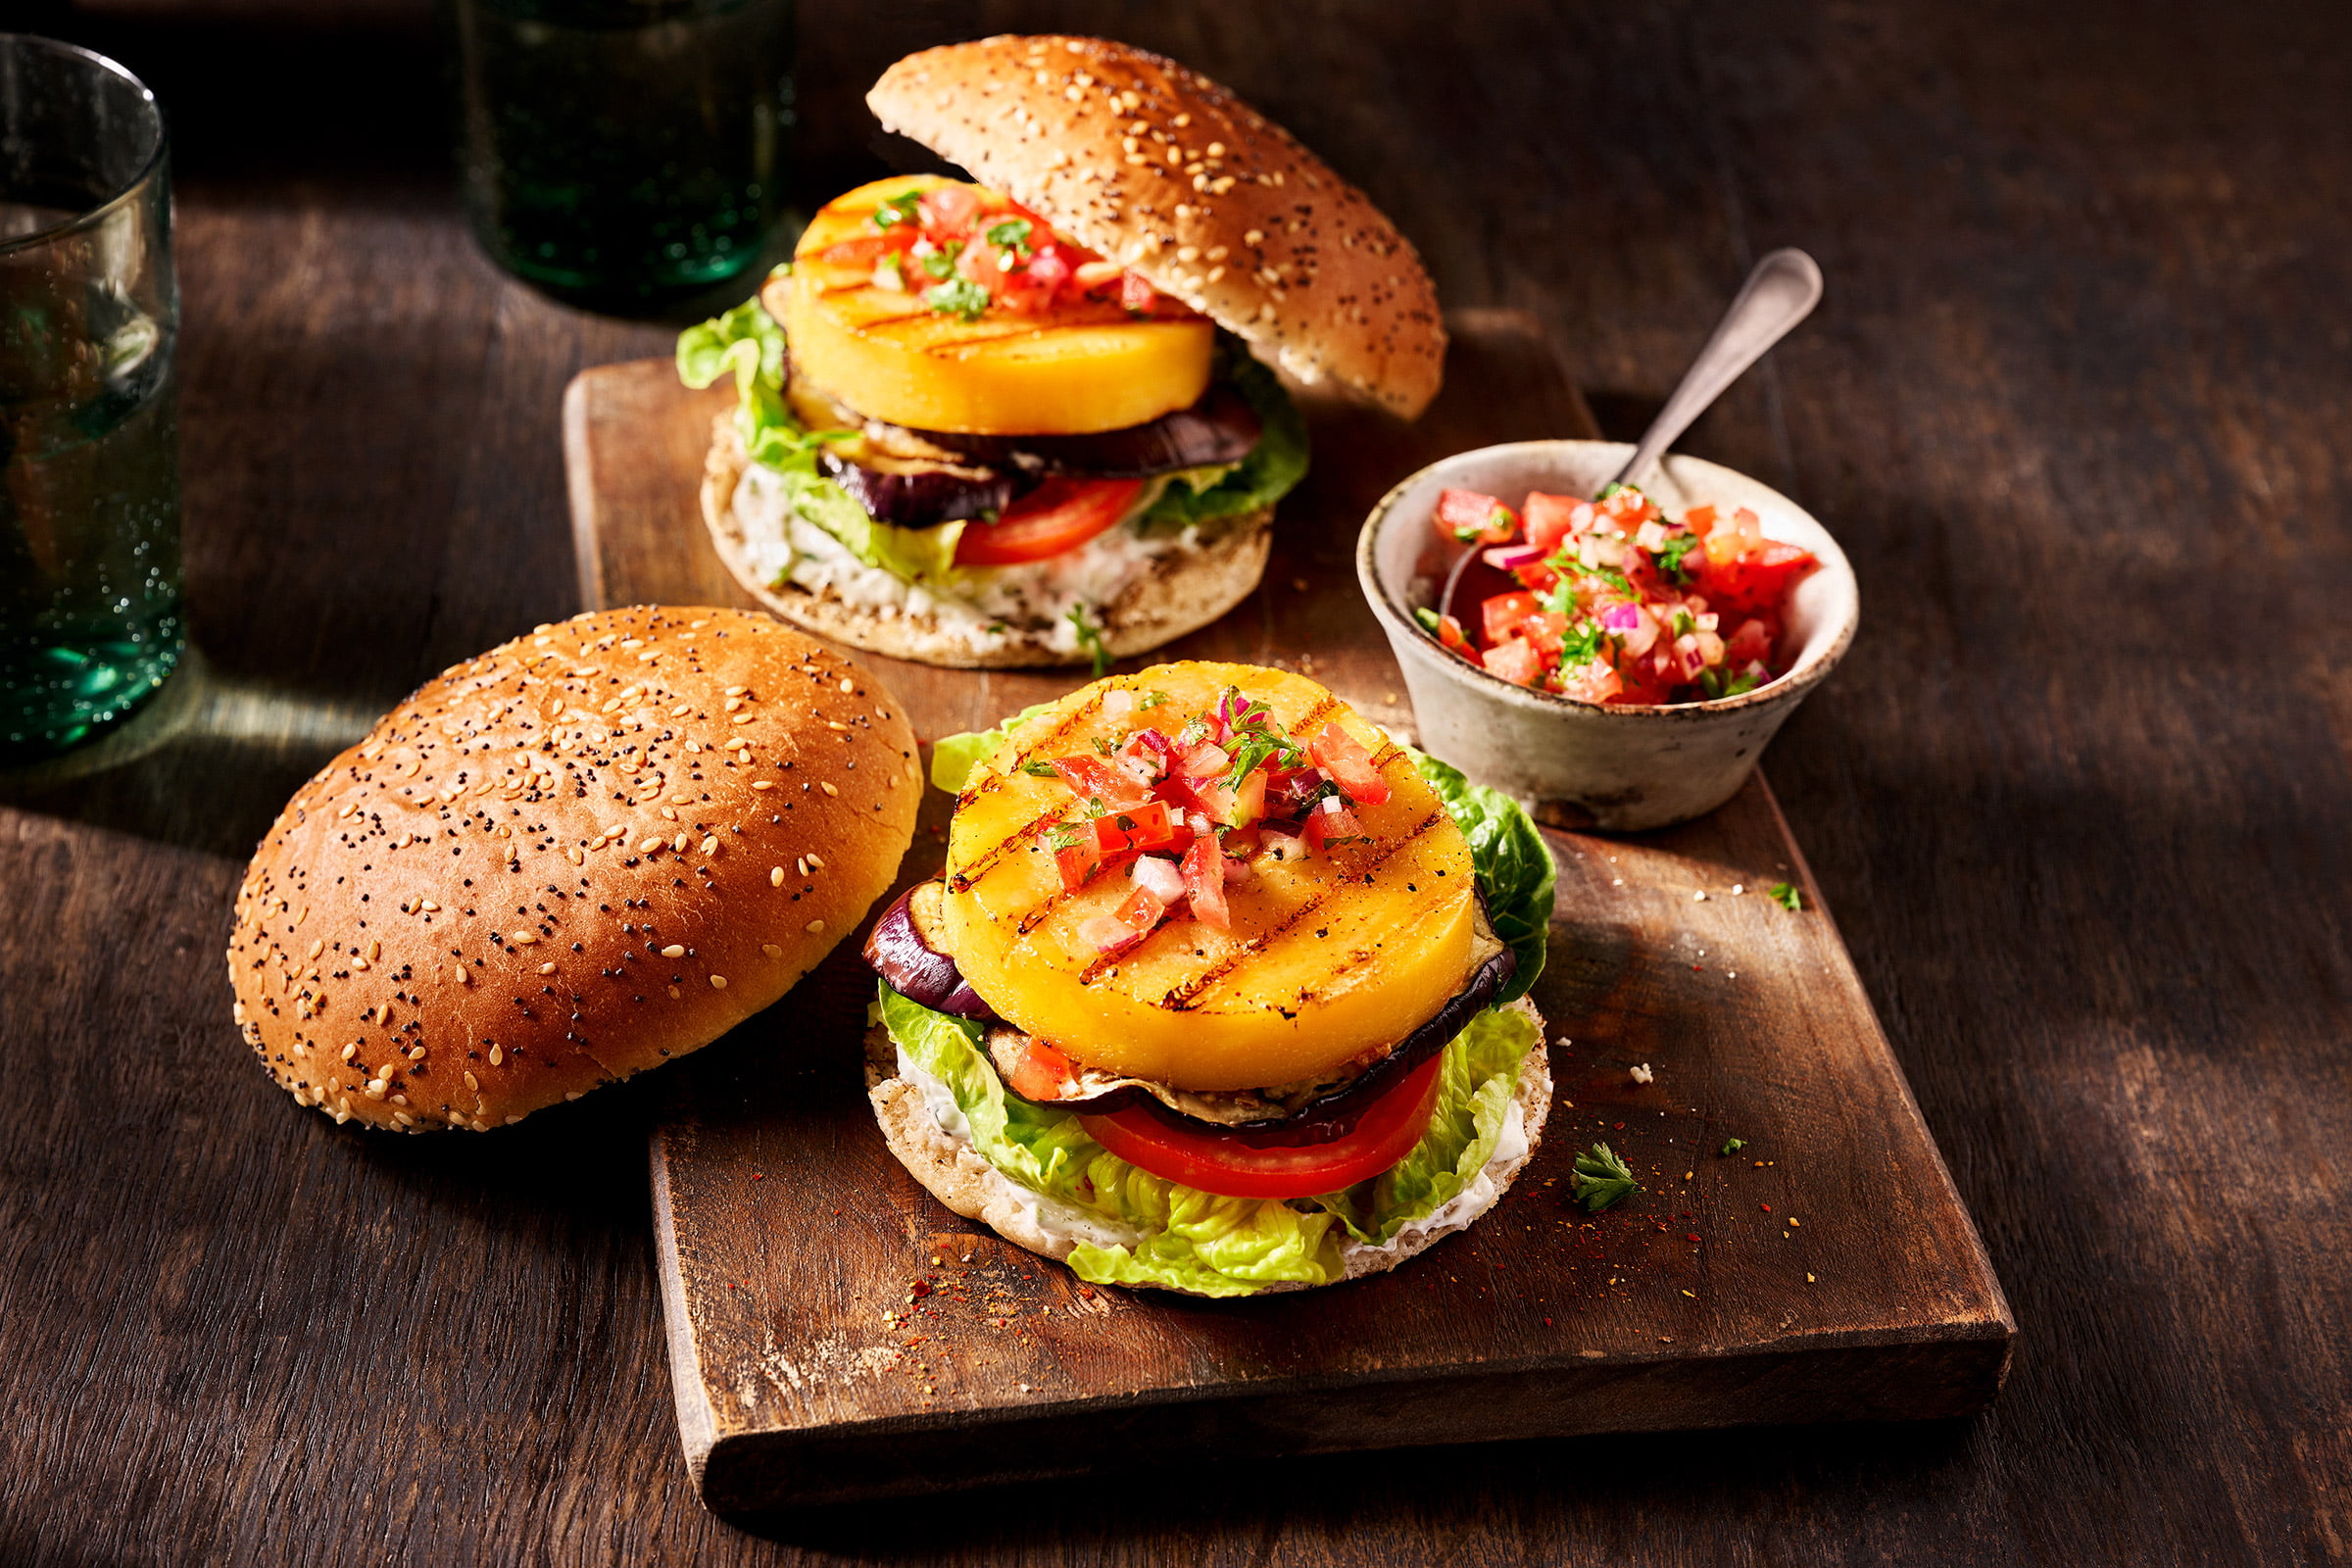 Tasty grill Burger with cucumber yoghurt, grilled eggplant and tomato salsa